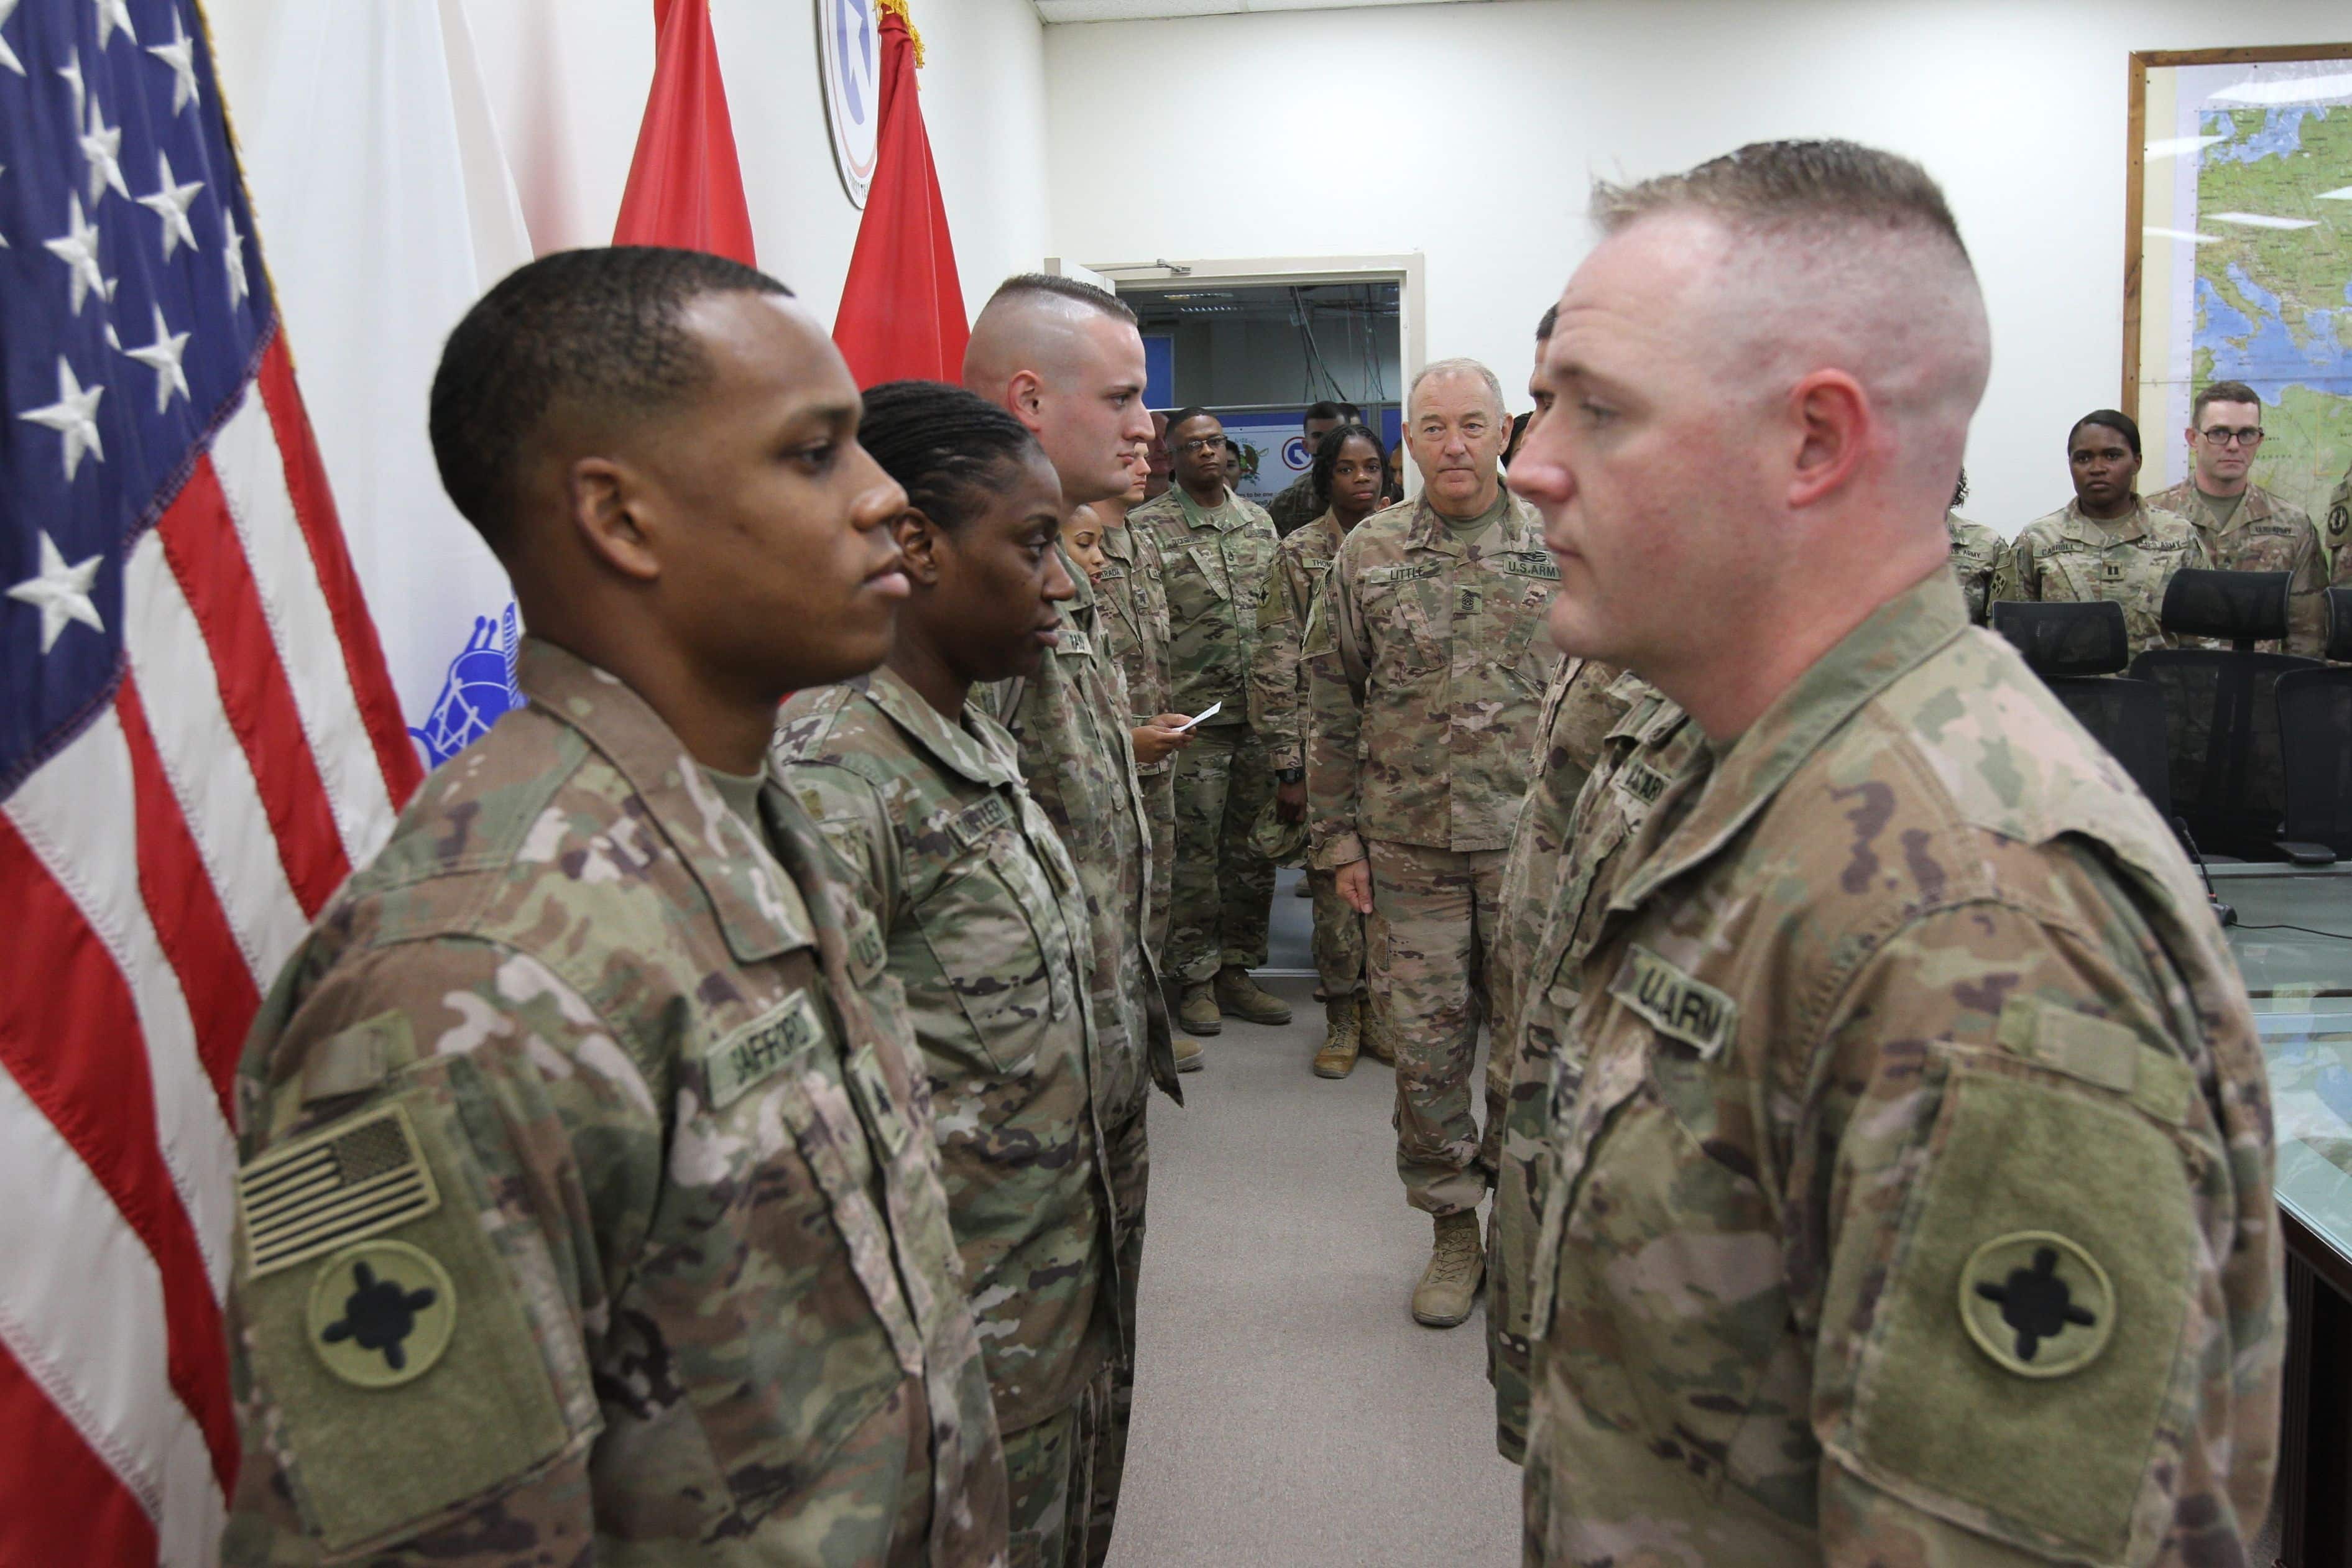 Soldiers of the 184th Sustainment Command are promoted to the rank of sergeant at Camp Arifjan, Kuwait, July 13, 2019. (U.S. Army National Guard photo by Sgt. Ashley Breland)